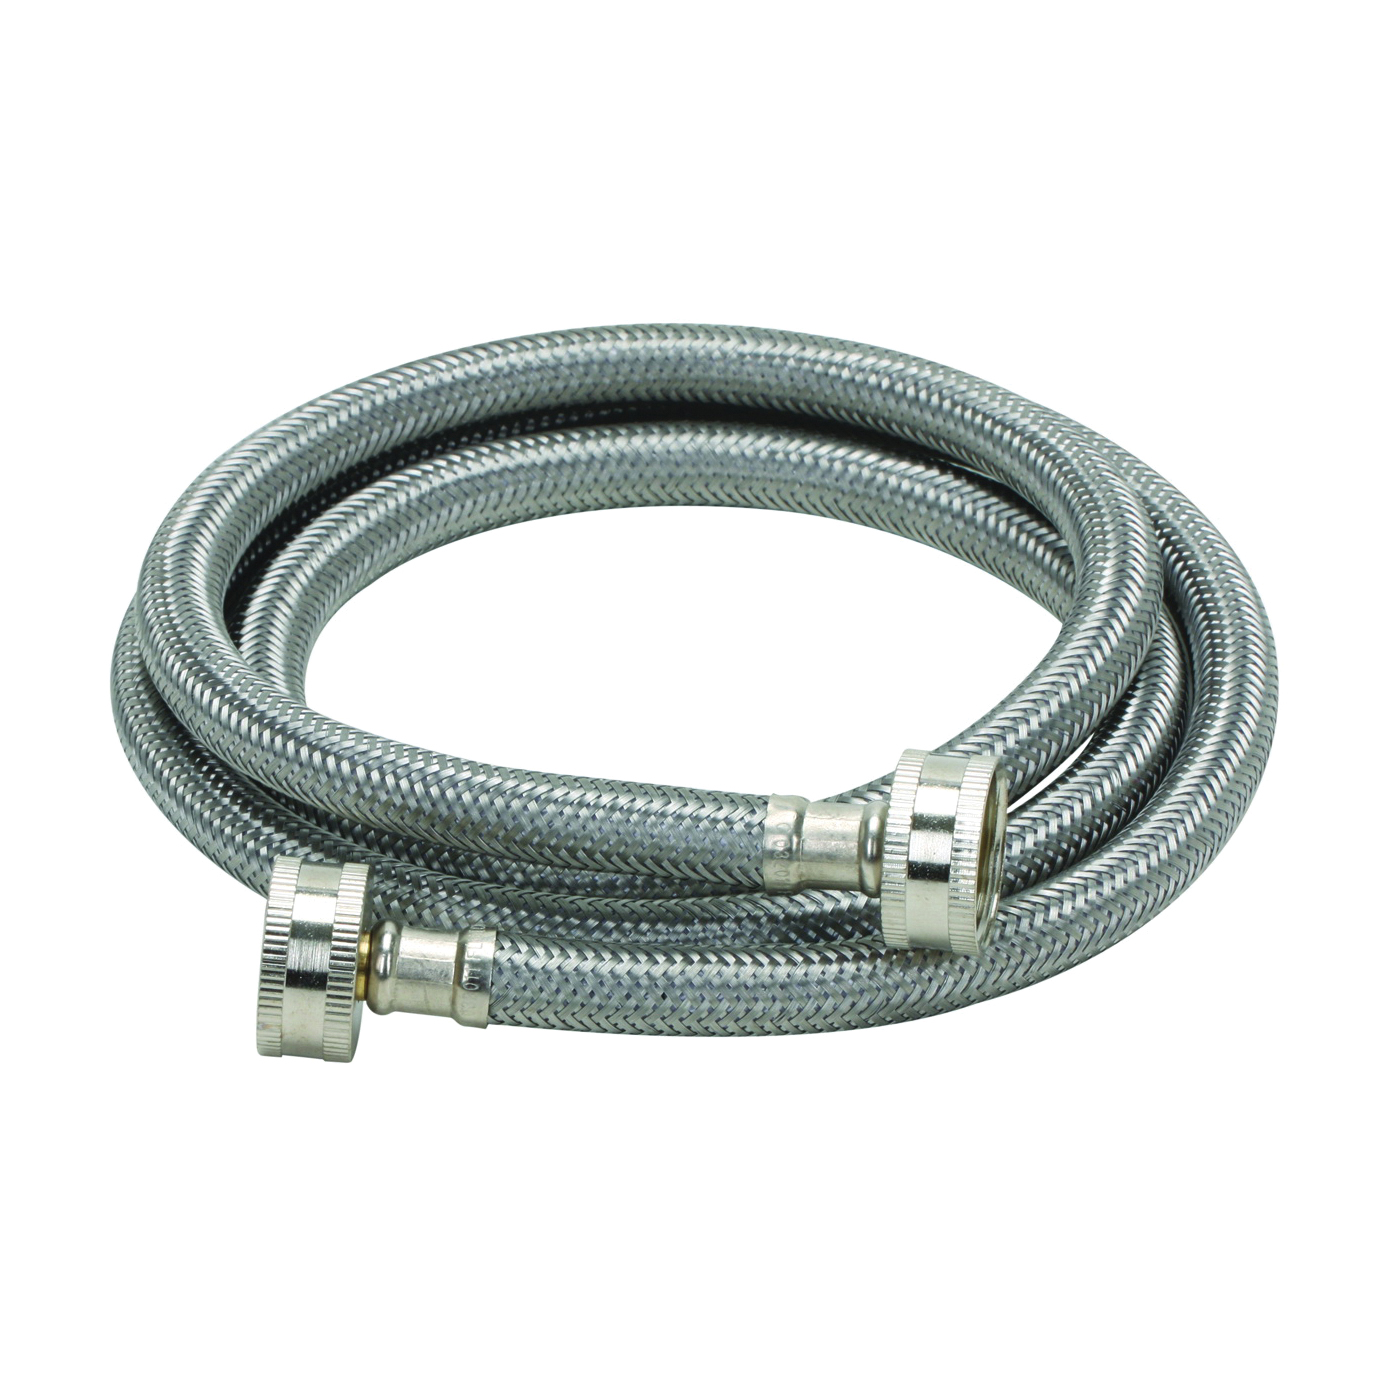 9WM60 Washing Machine Discharge Hose, 3/4 in ID, 60 in L, Female, Stainless Steel